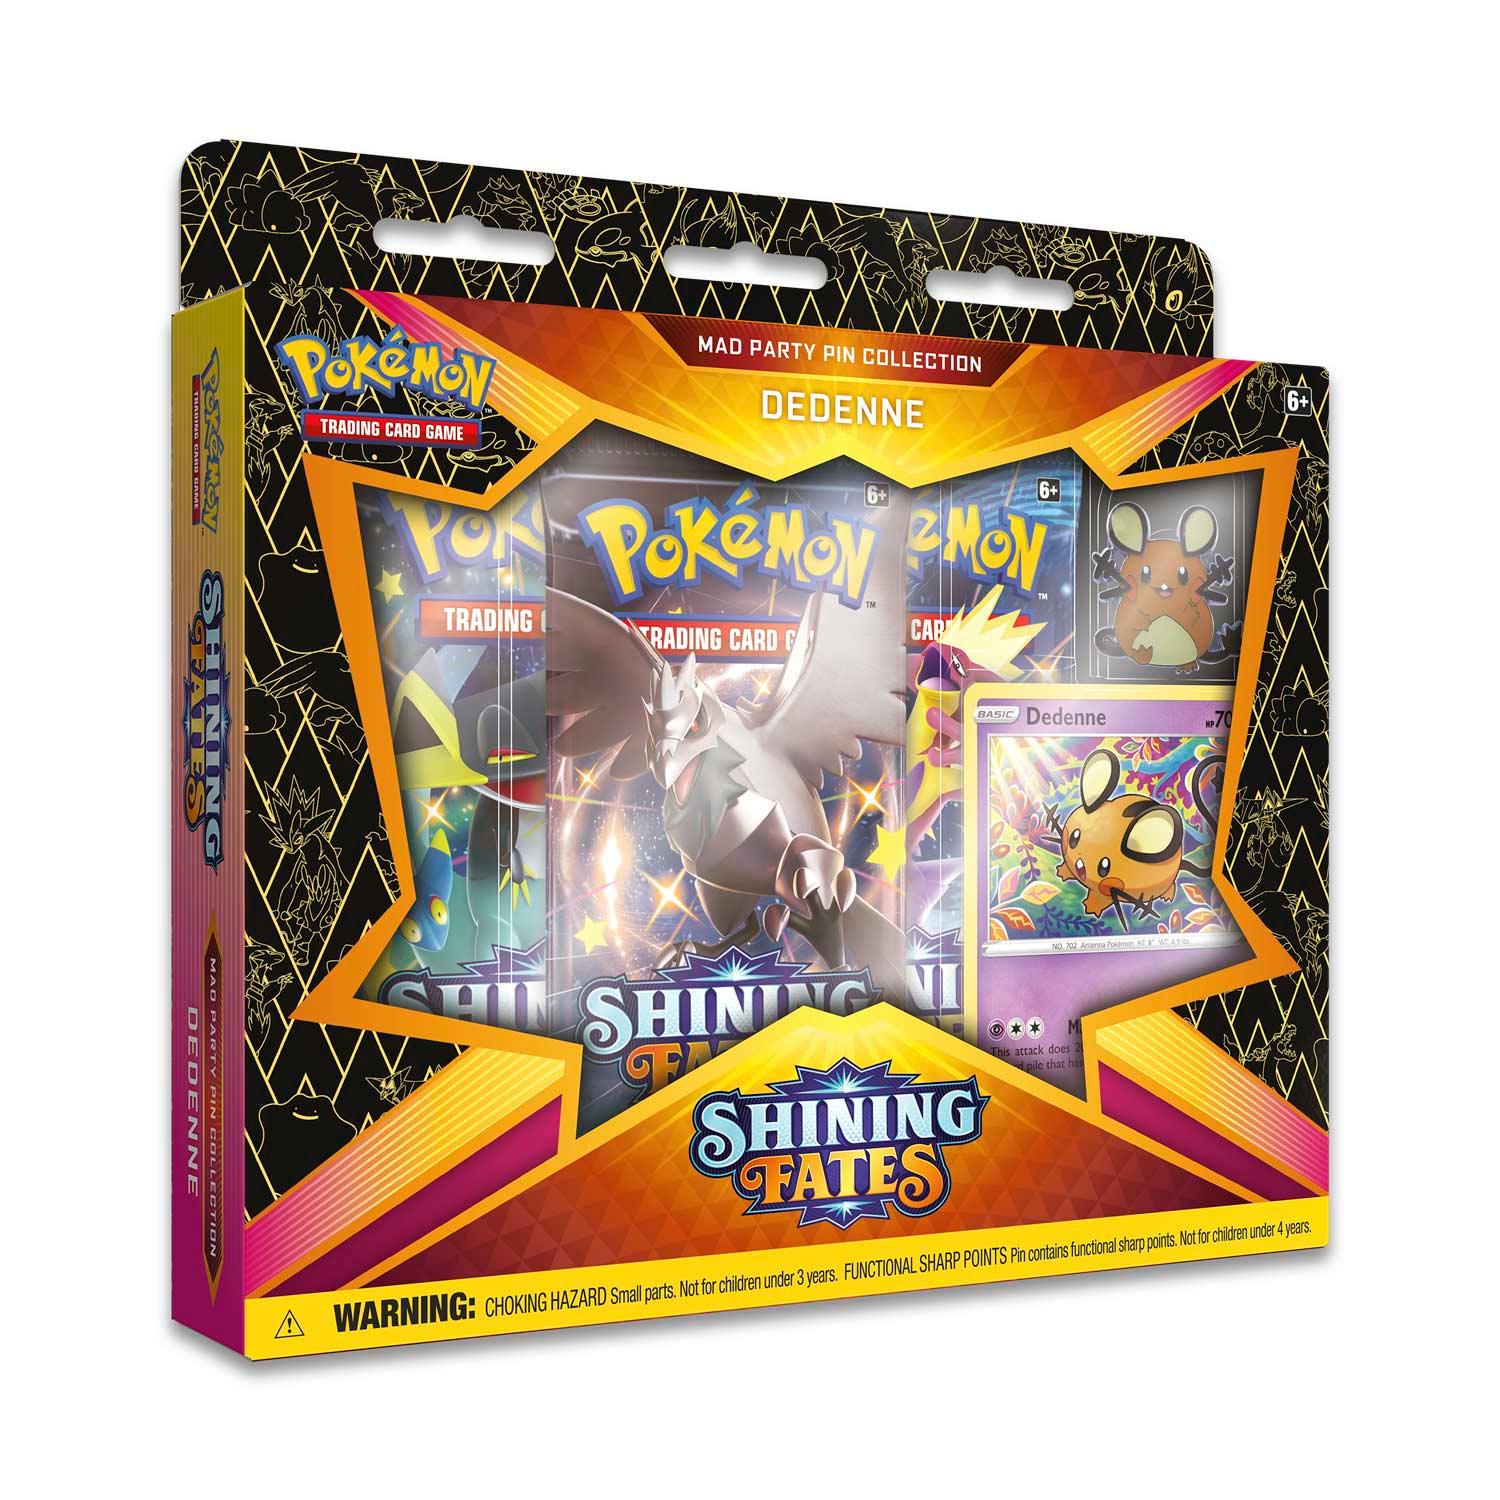 Pokemon Box - Mad Party Pin Collection - Shining Fates - Dedenne Pin - Hobby Champion Inc